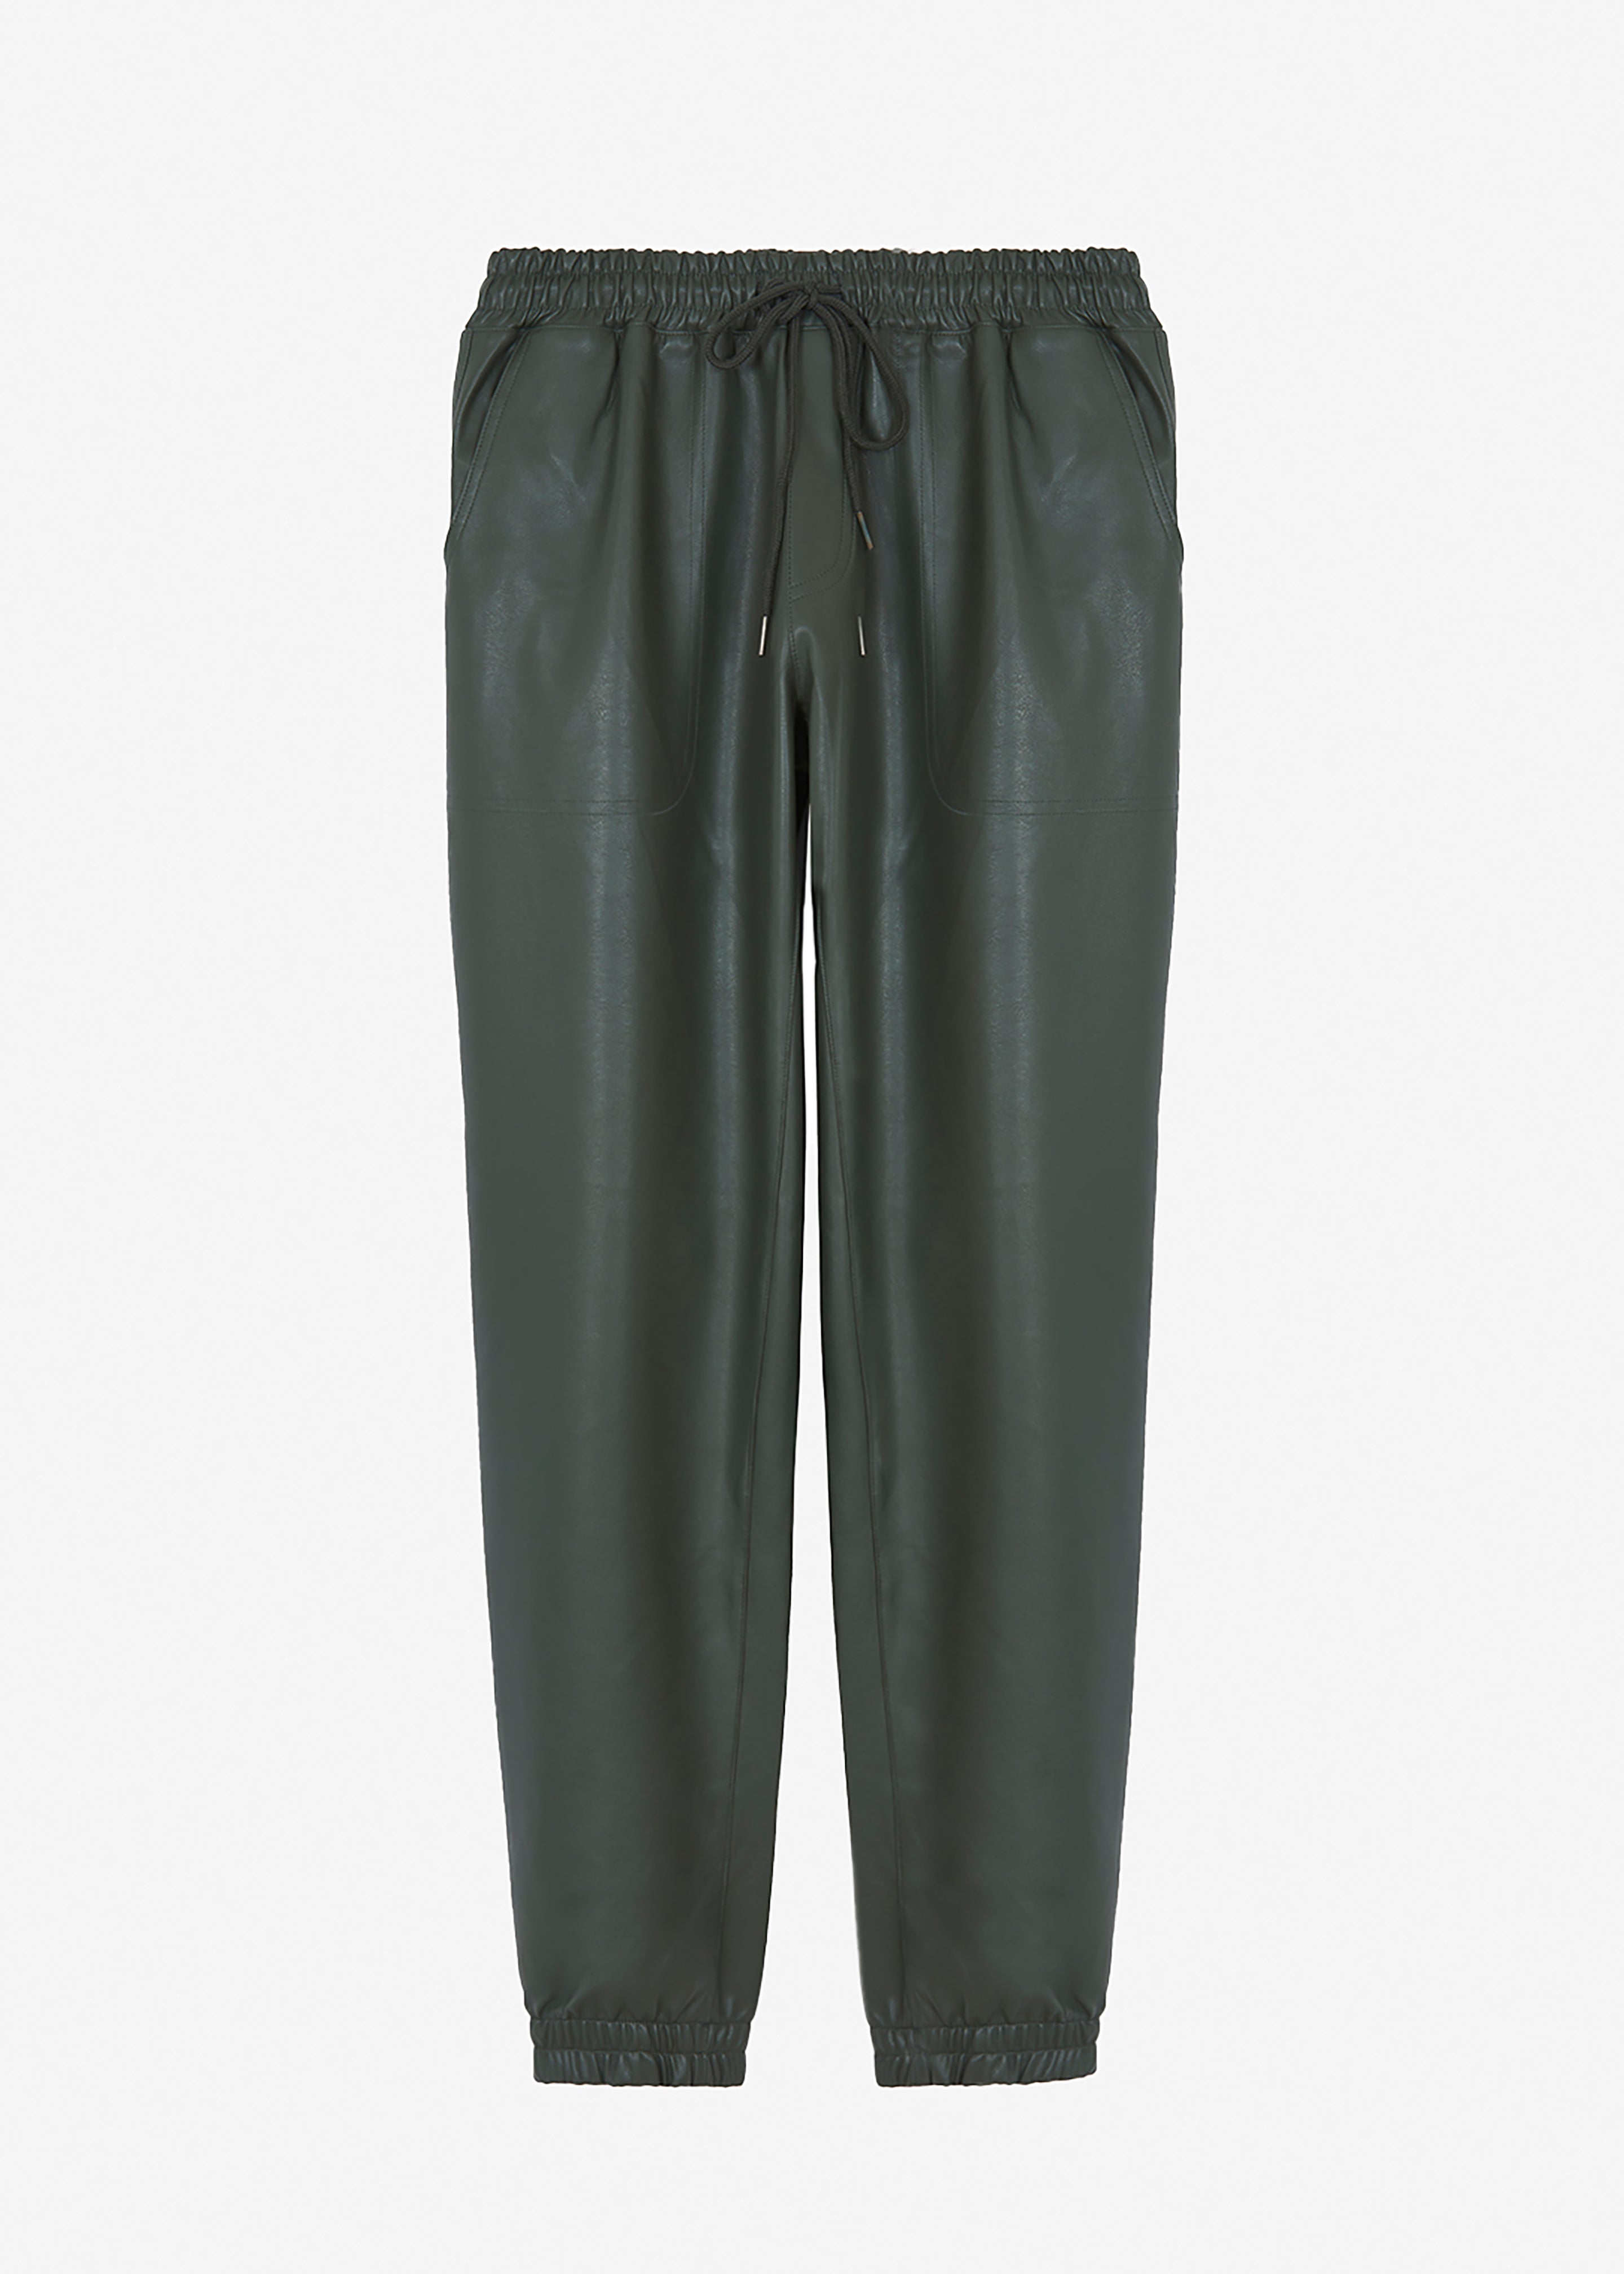 Brighton Faux Leather Joggers - Olive - 7